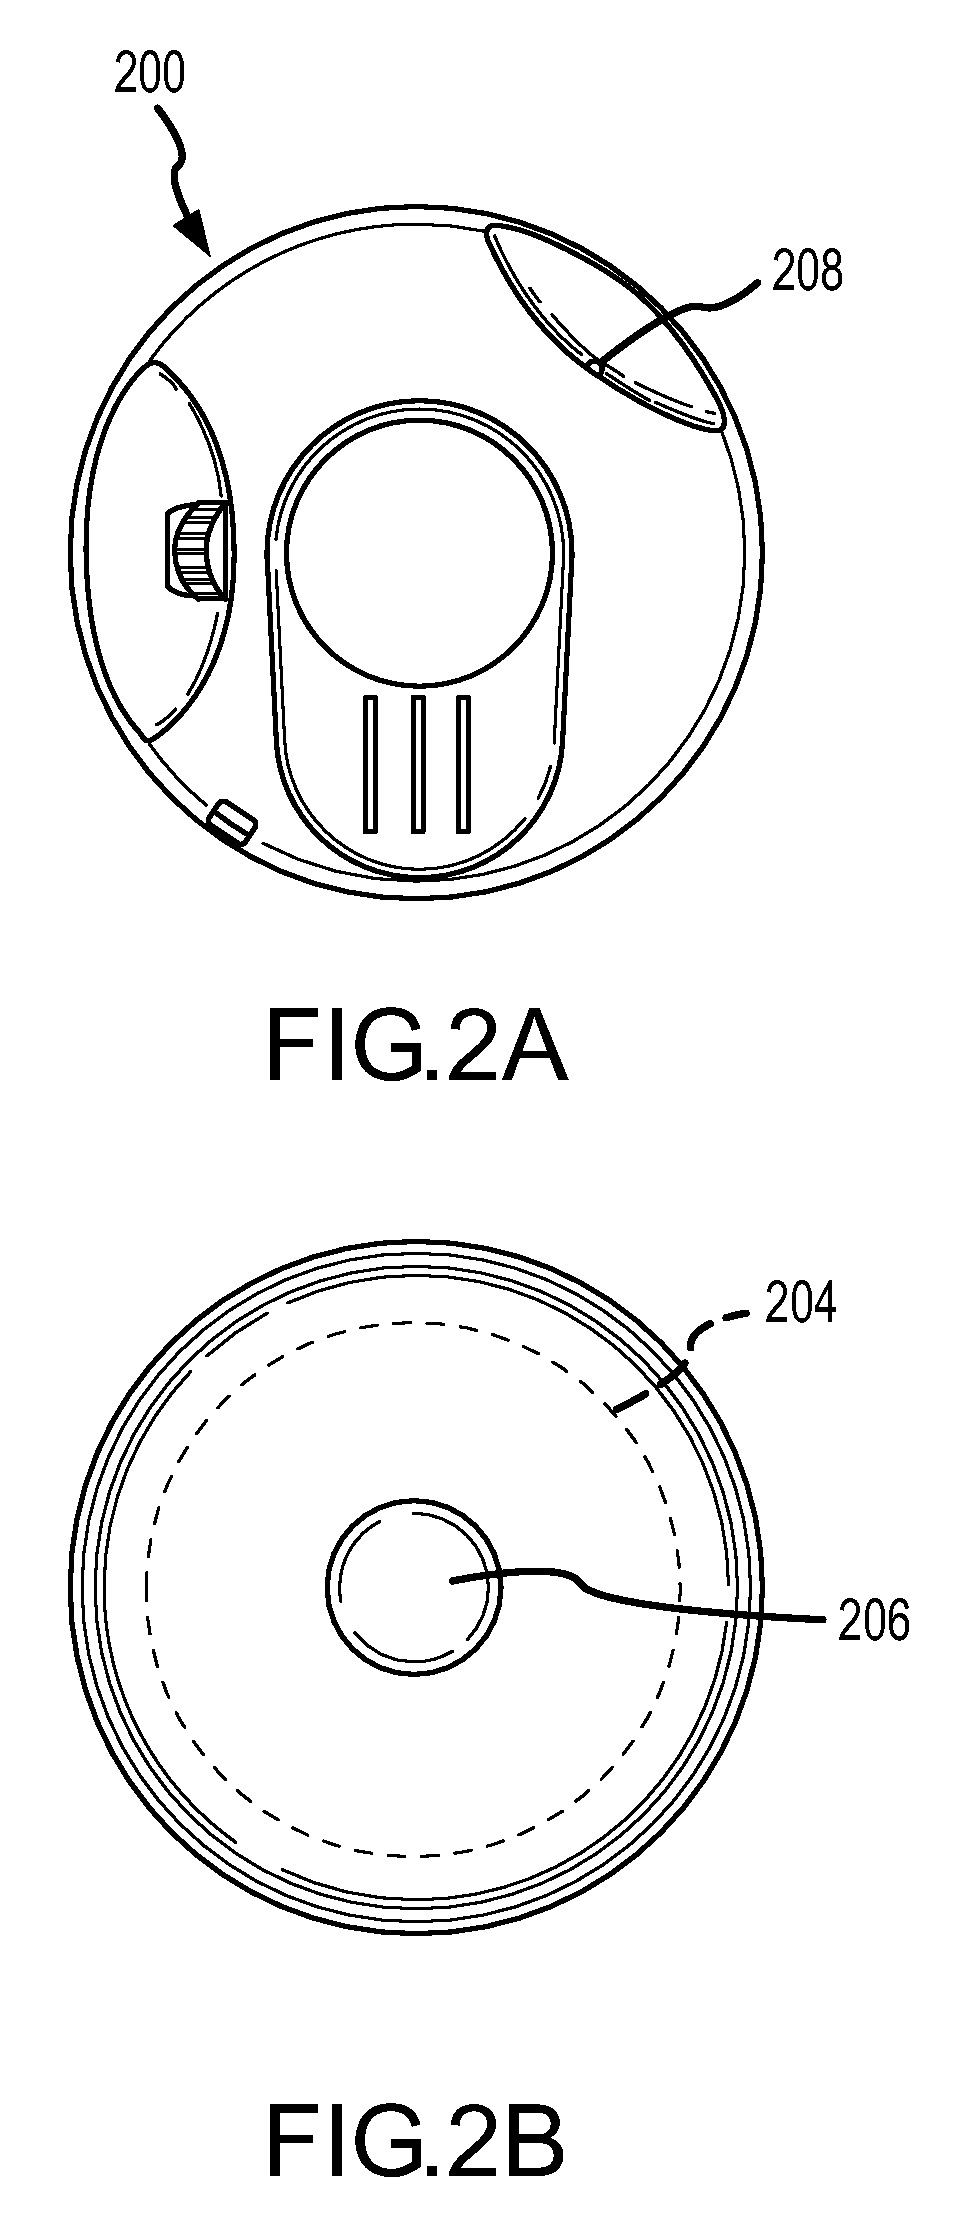 Retention apparatus for an external portion of a semi-implantable hearing aid